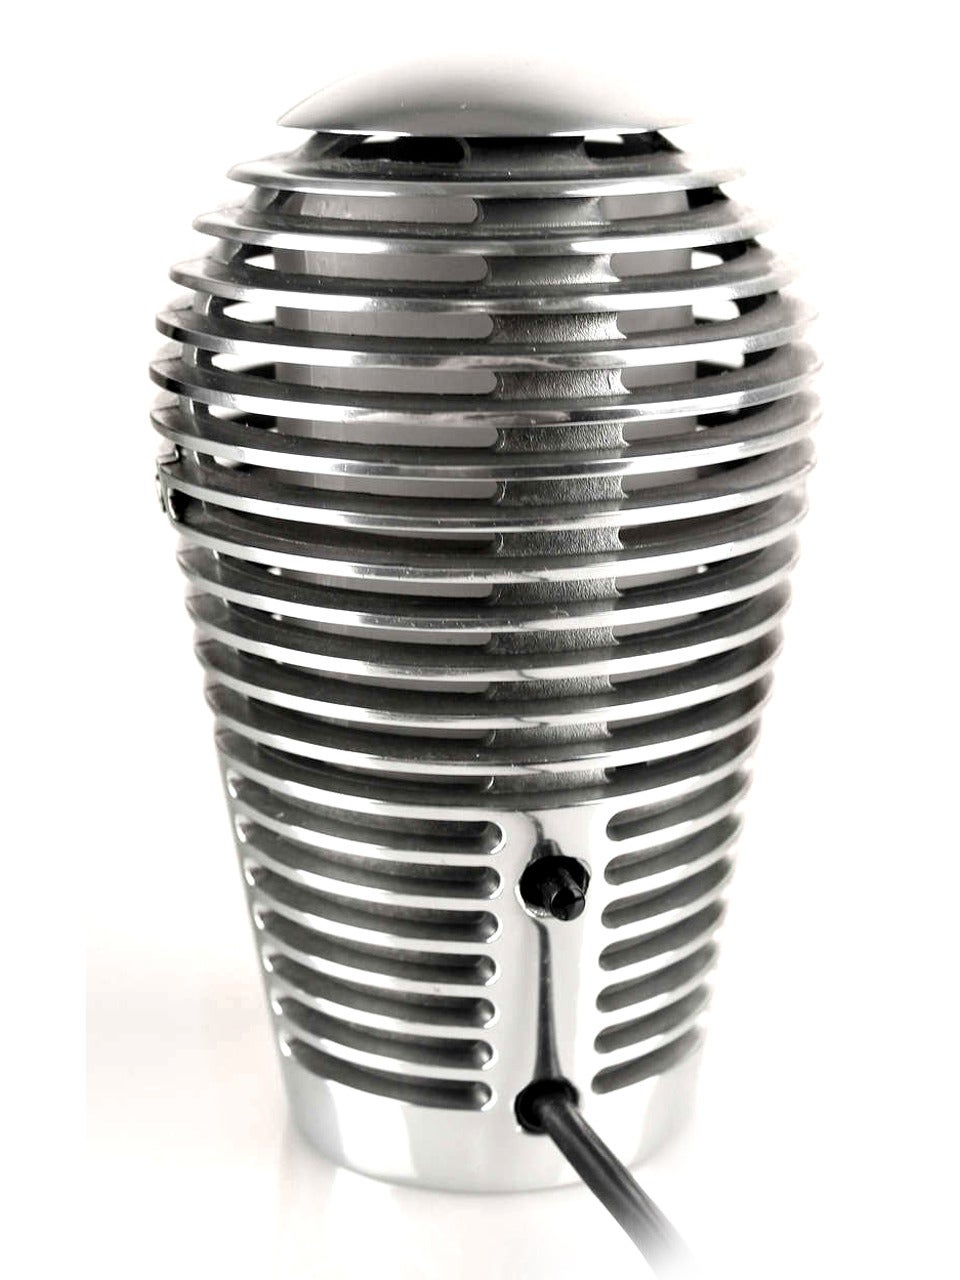 Metalarte was the maker of this Zen table lamp by Sergi et Oscar Devesa.
It a beautiful clean louvered bullet shape design in cast aluminum and takes one candelabra bulb each. This lamp is no longer in production and is signed on the bottom.